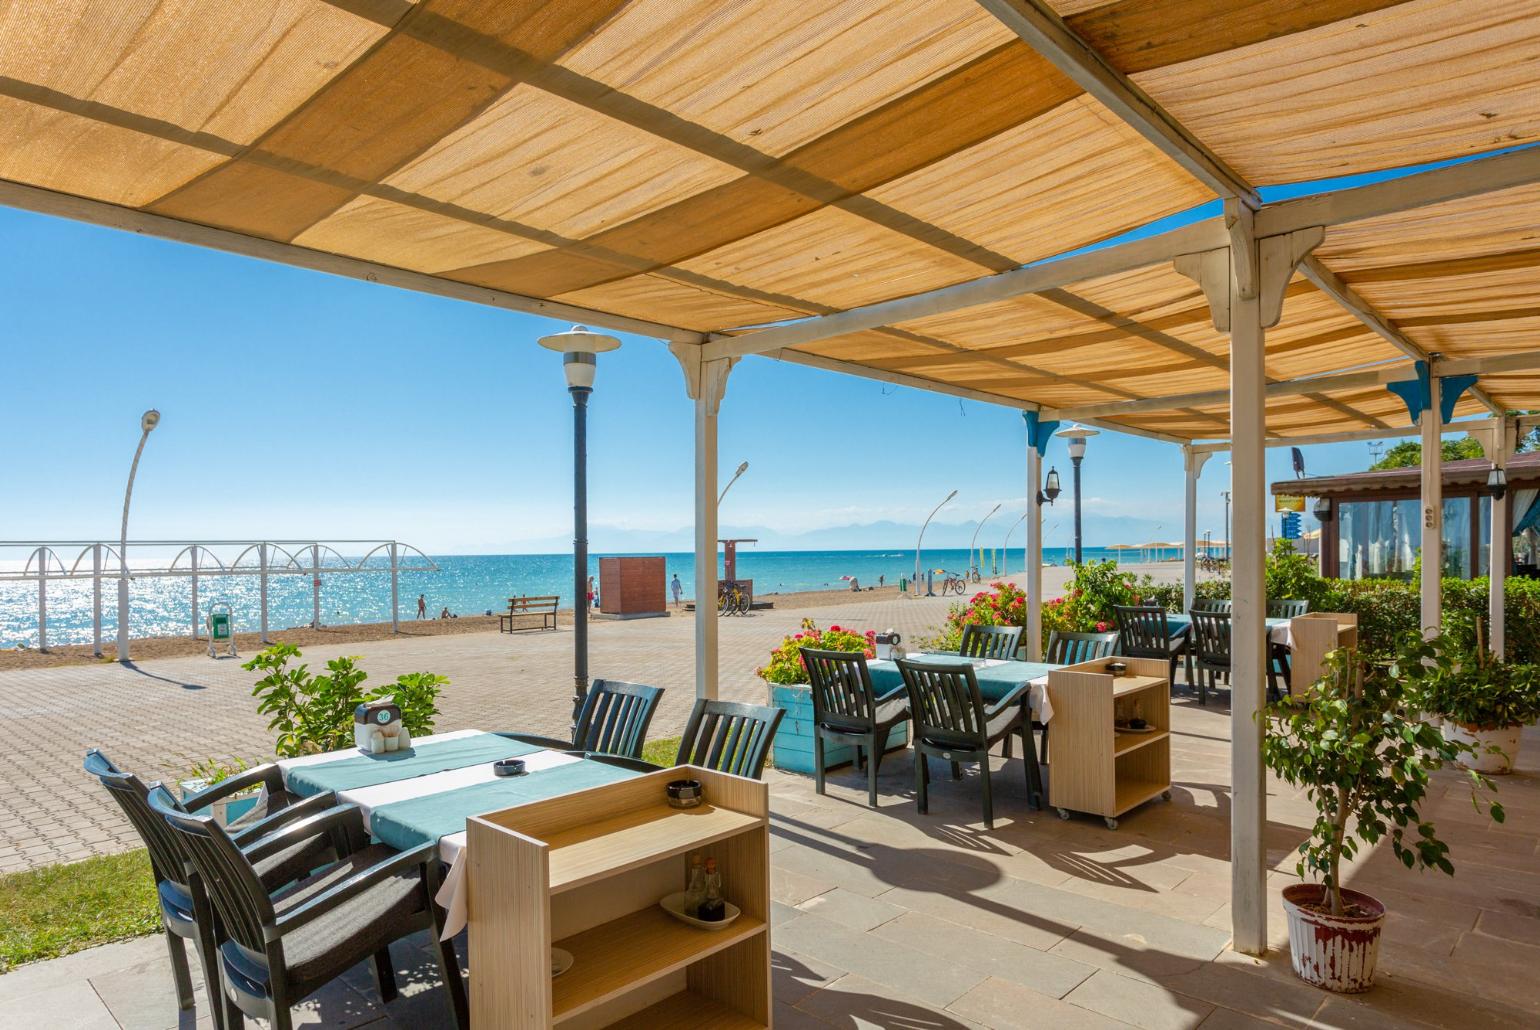 Beachfront restaurant accessible via free shuttle service from the Classe Collection